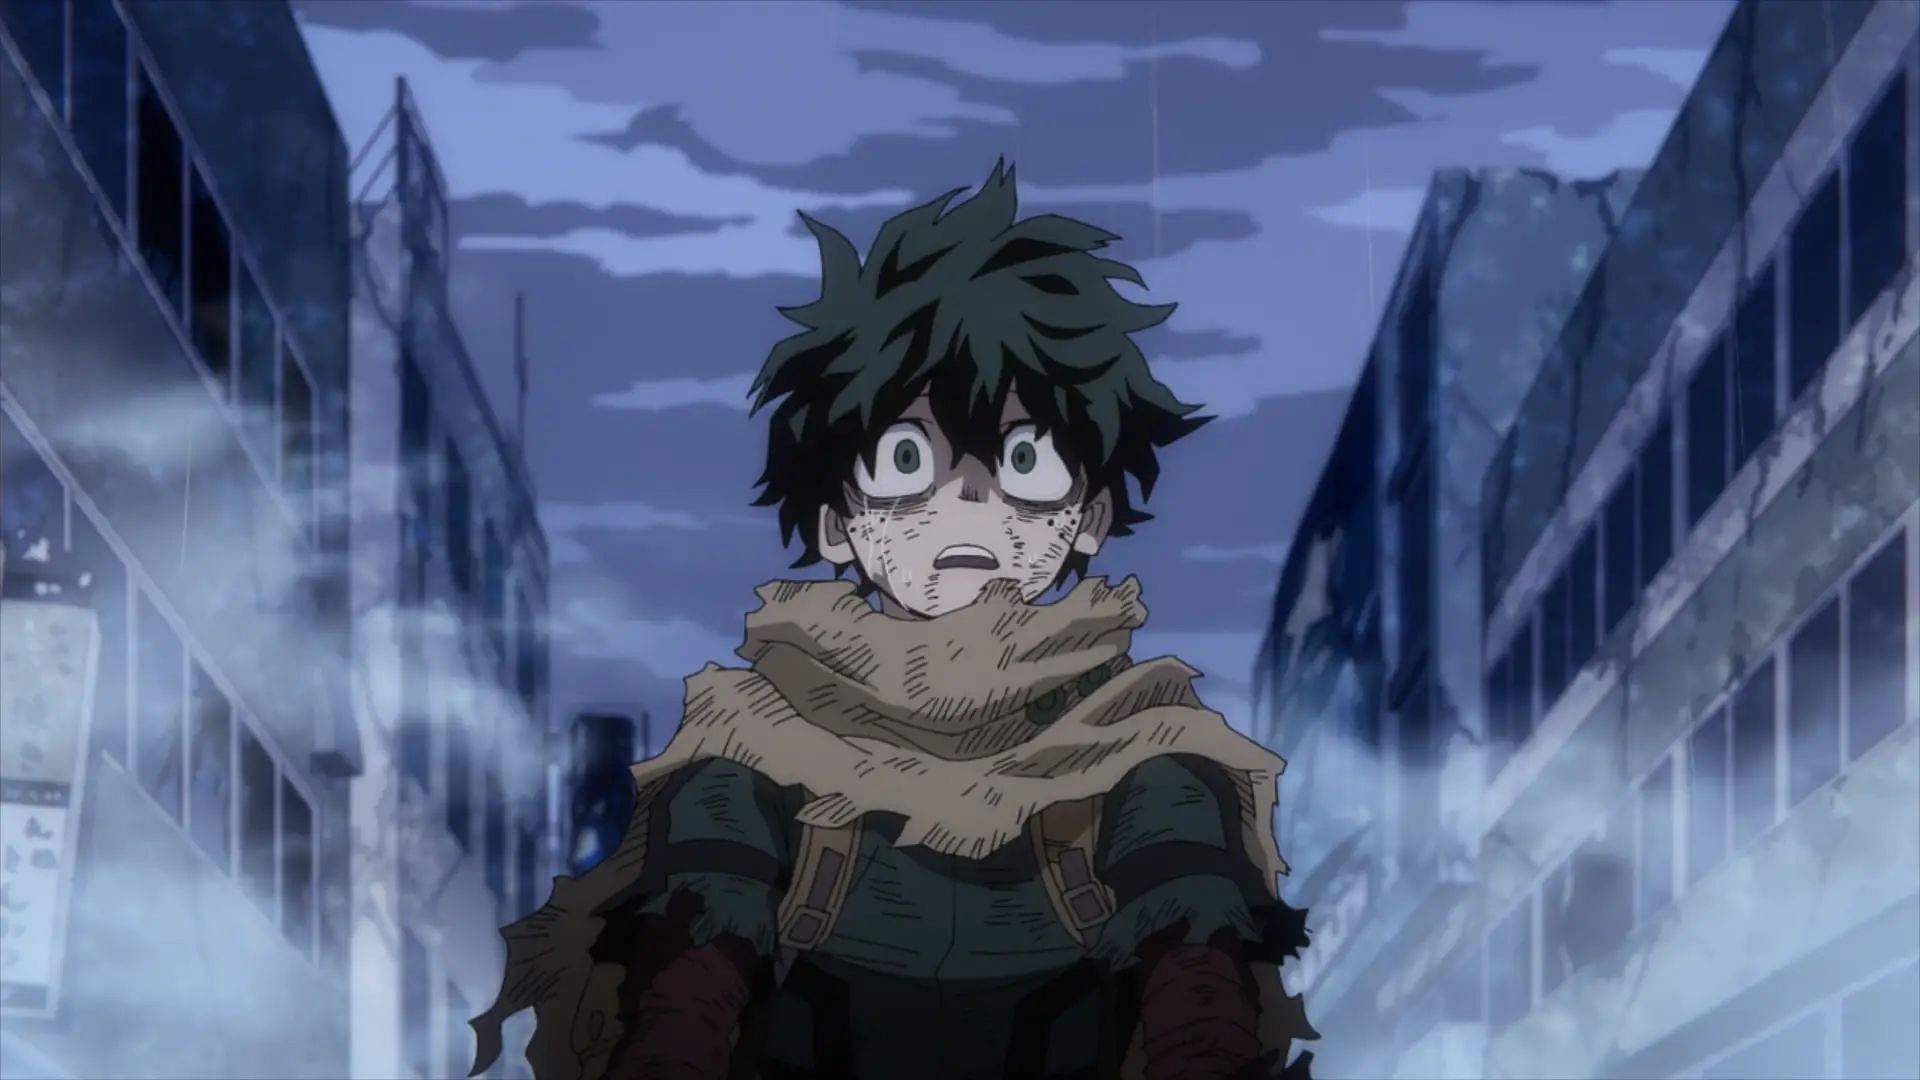 Fans are in disbelief at the horrific quality of My Hero Academia